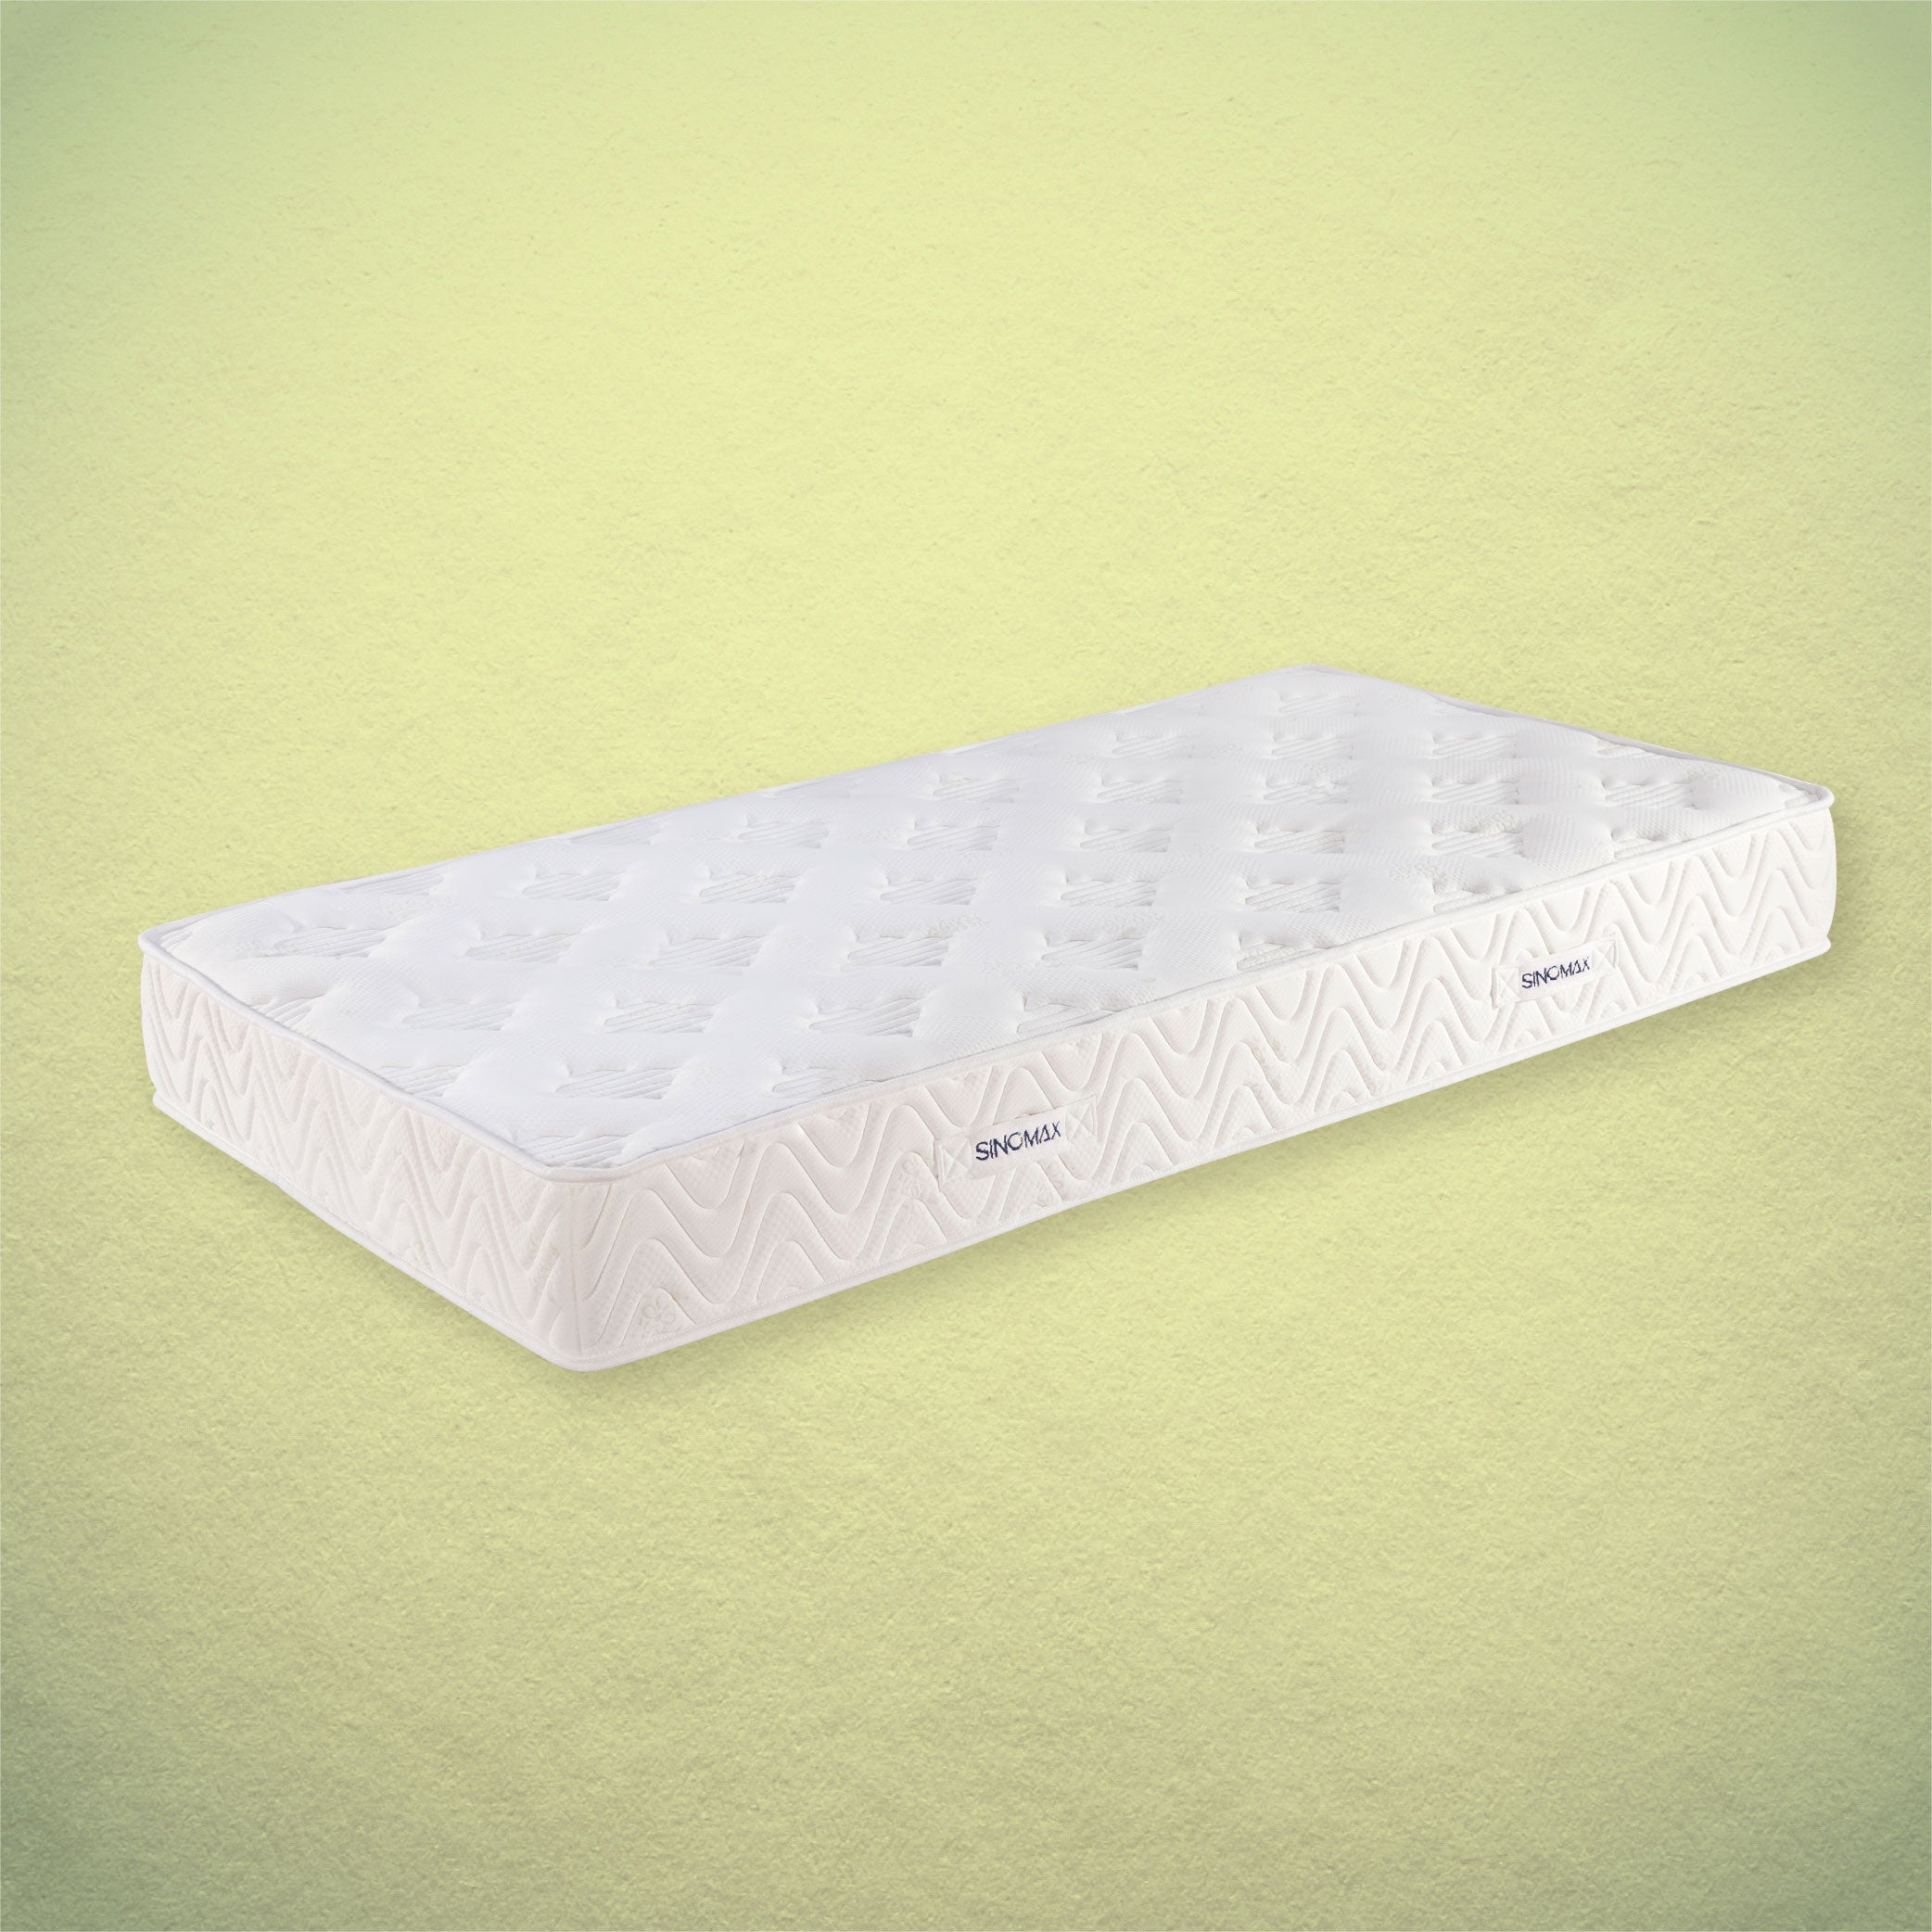 Relieving Spinal-Care Mattress
